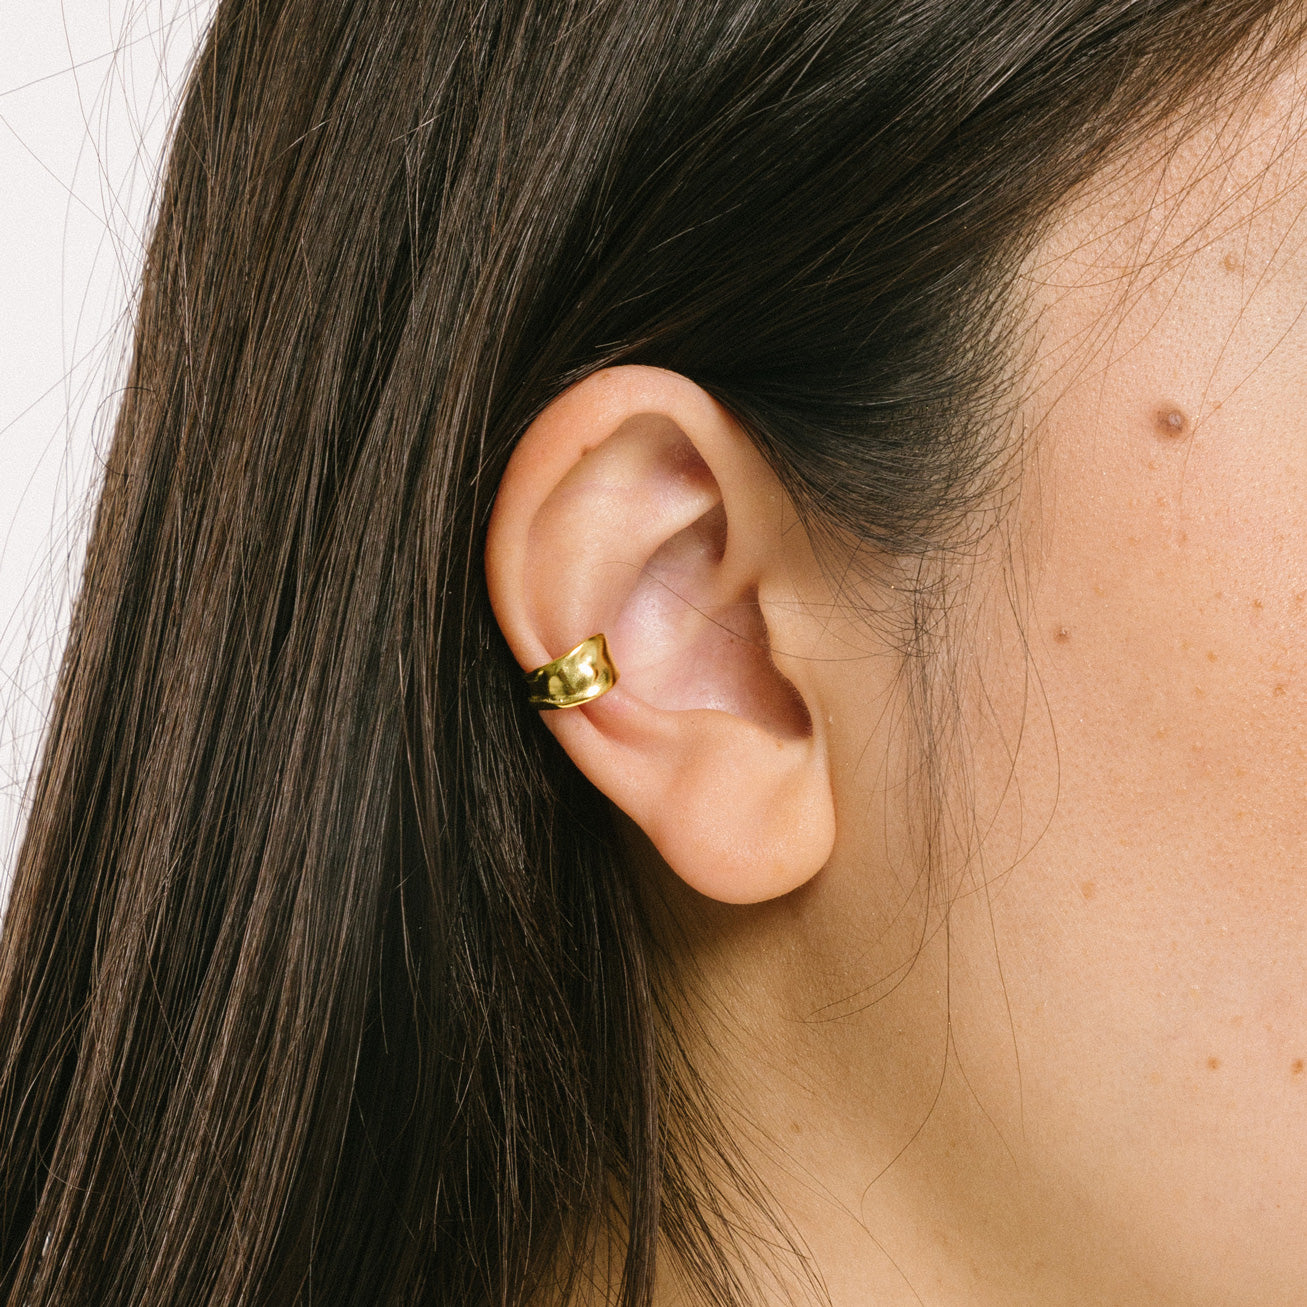 A model wearing the Aya Ear Cuff in Gold, made with 925 Sterling Silver for a timeless, luxurious style. Slip on these classy clip-on earrings to instantly elevate your look.